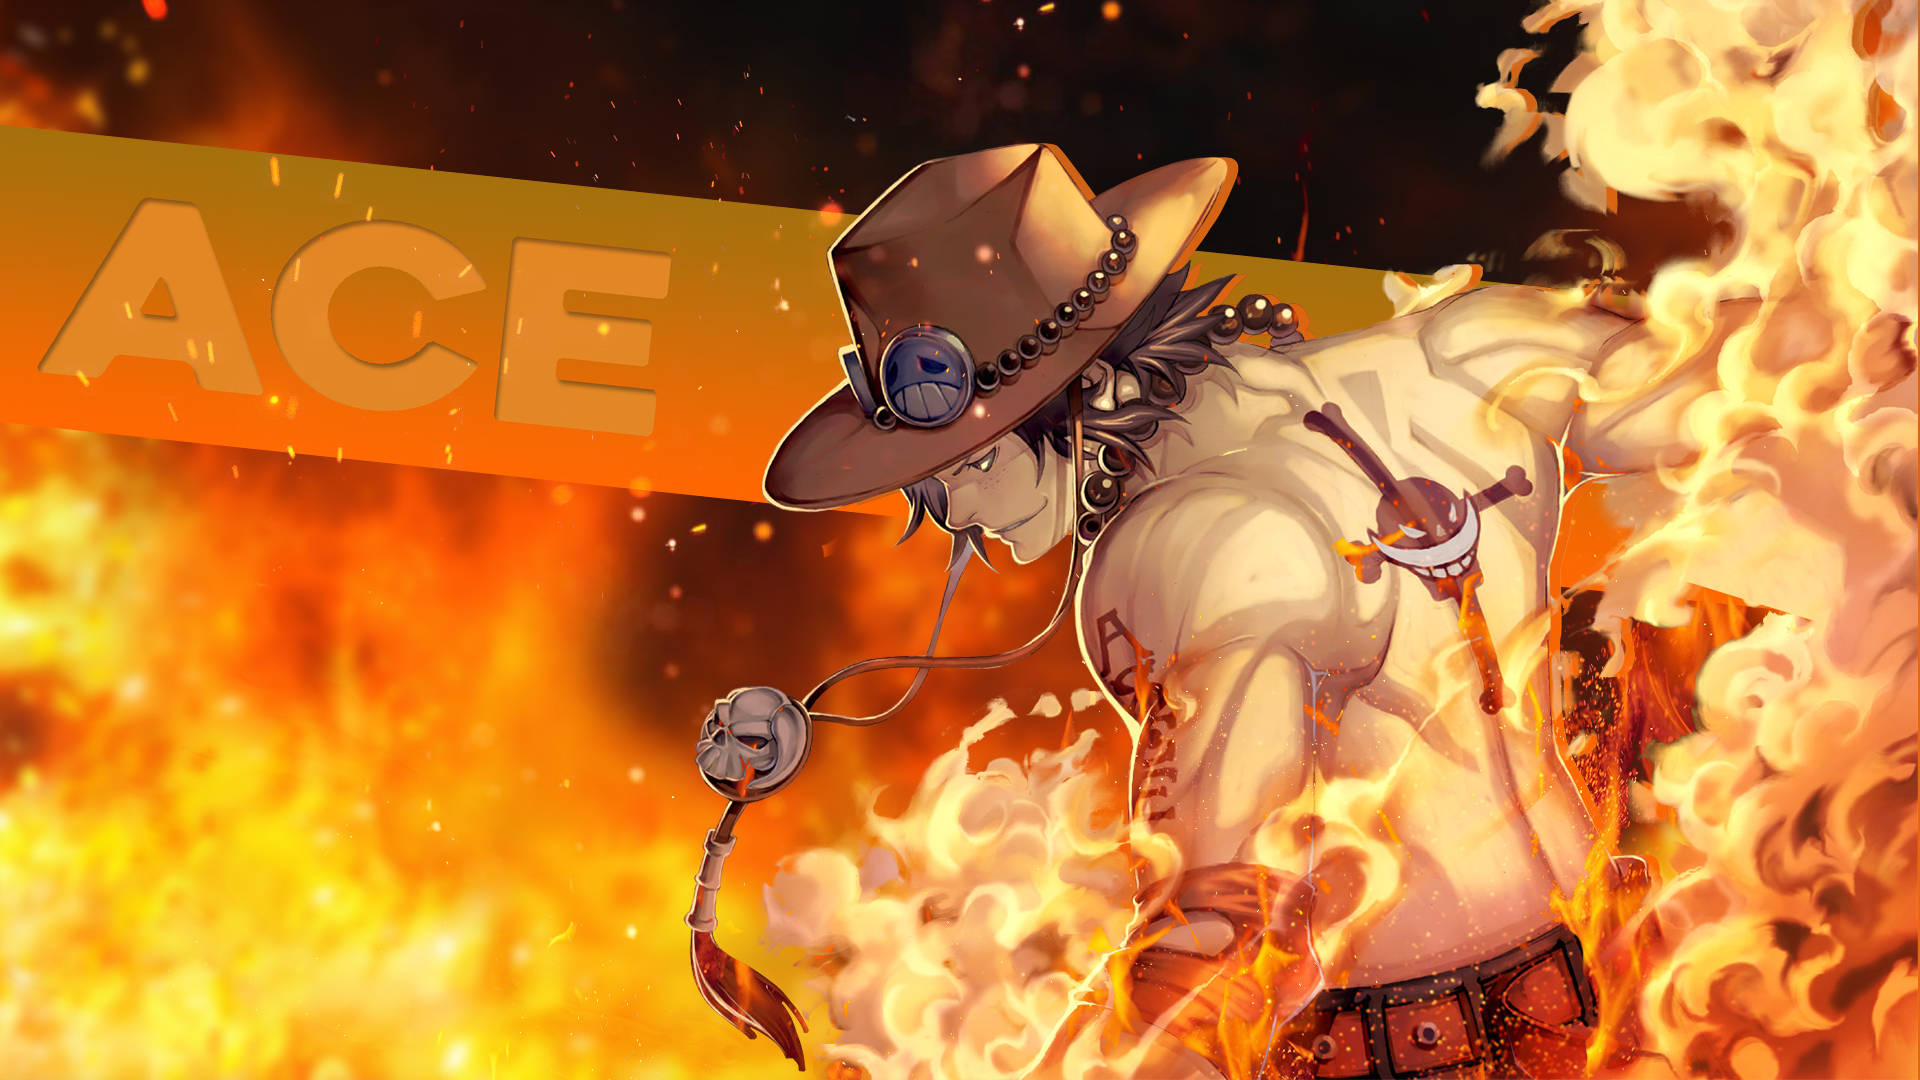 Fiery Ace Unleashed - One Piece Action Scene Background